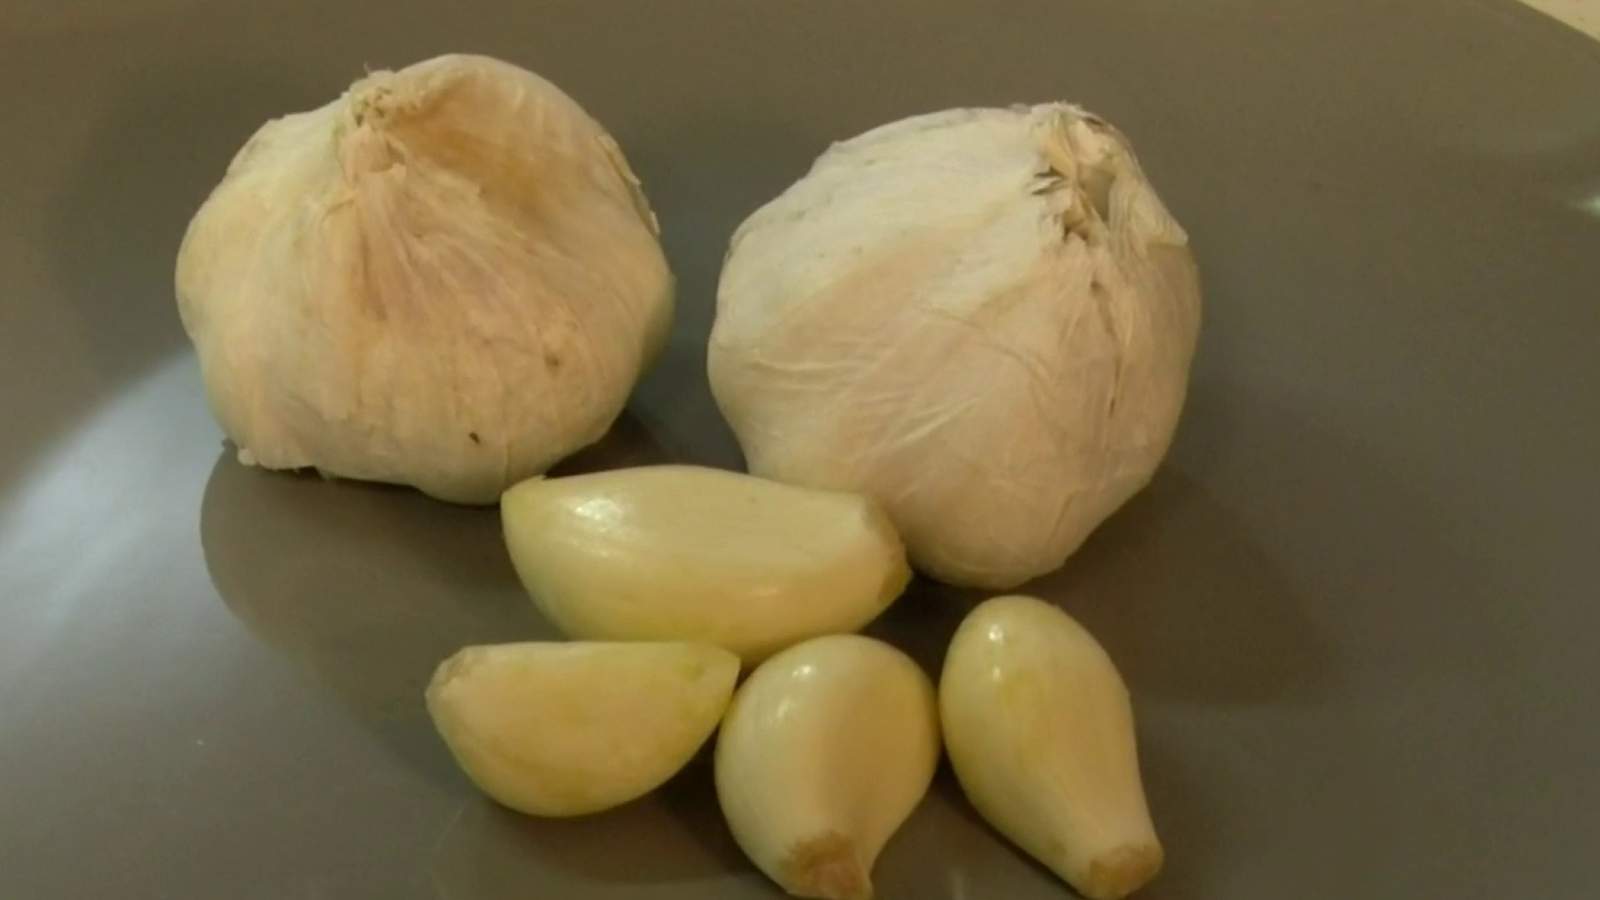 Want an easy way to peel garlic? Check this out!